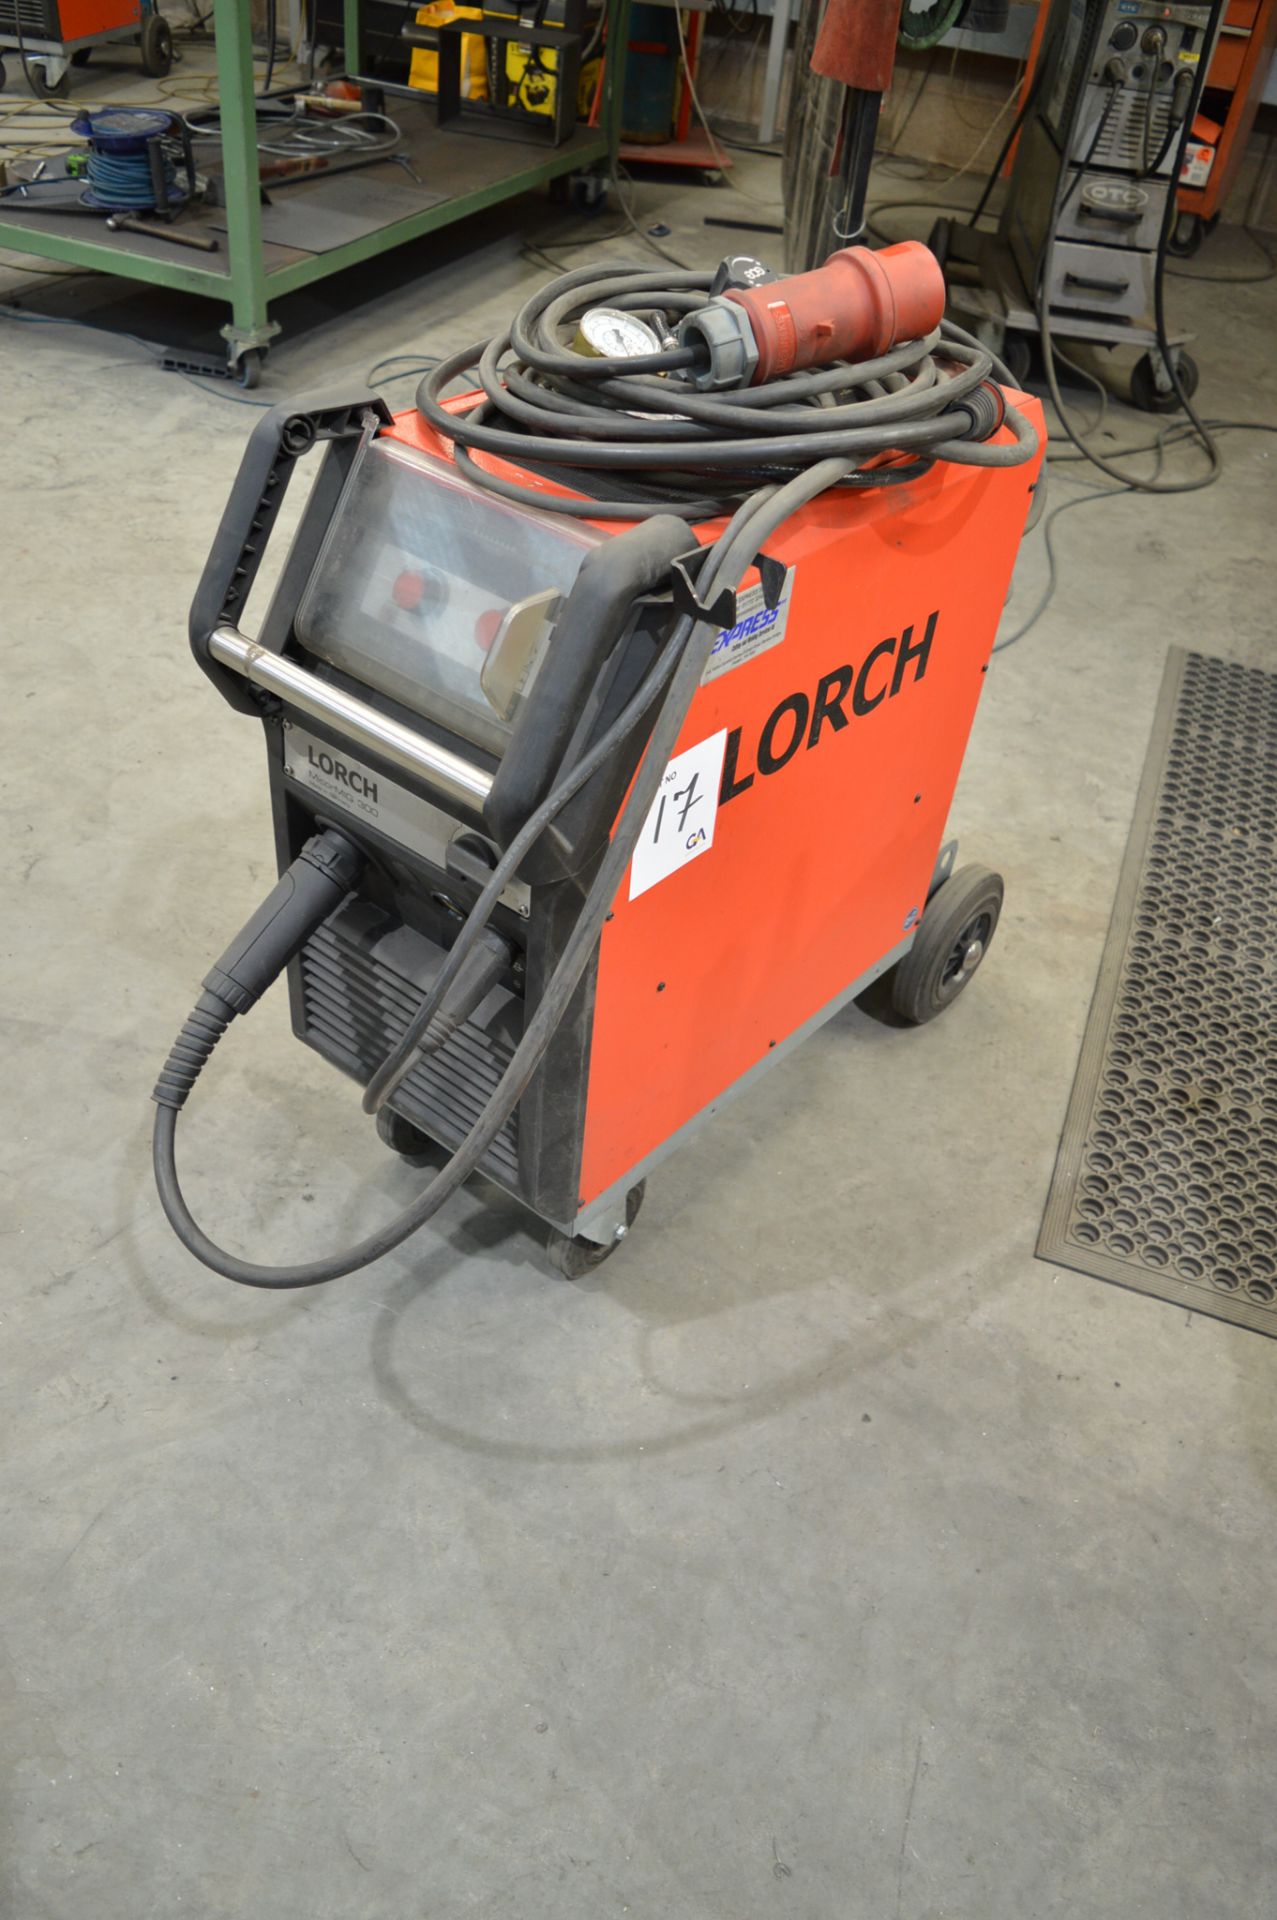 Lorch Micromig 300 MIG welder S/N: 4064-2630-0007-4 c/w torch, regulator and earth lead